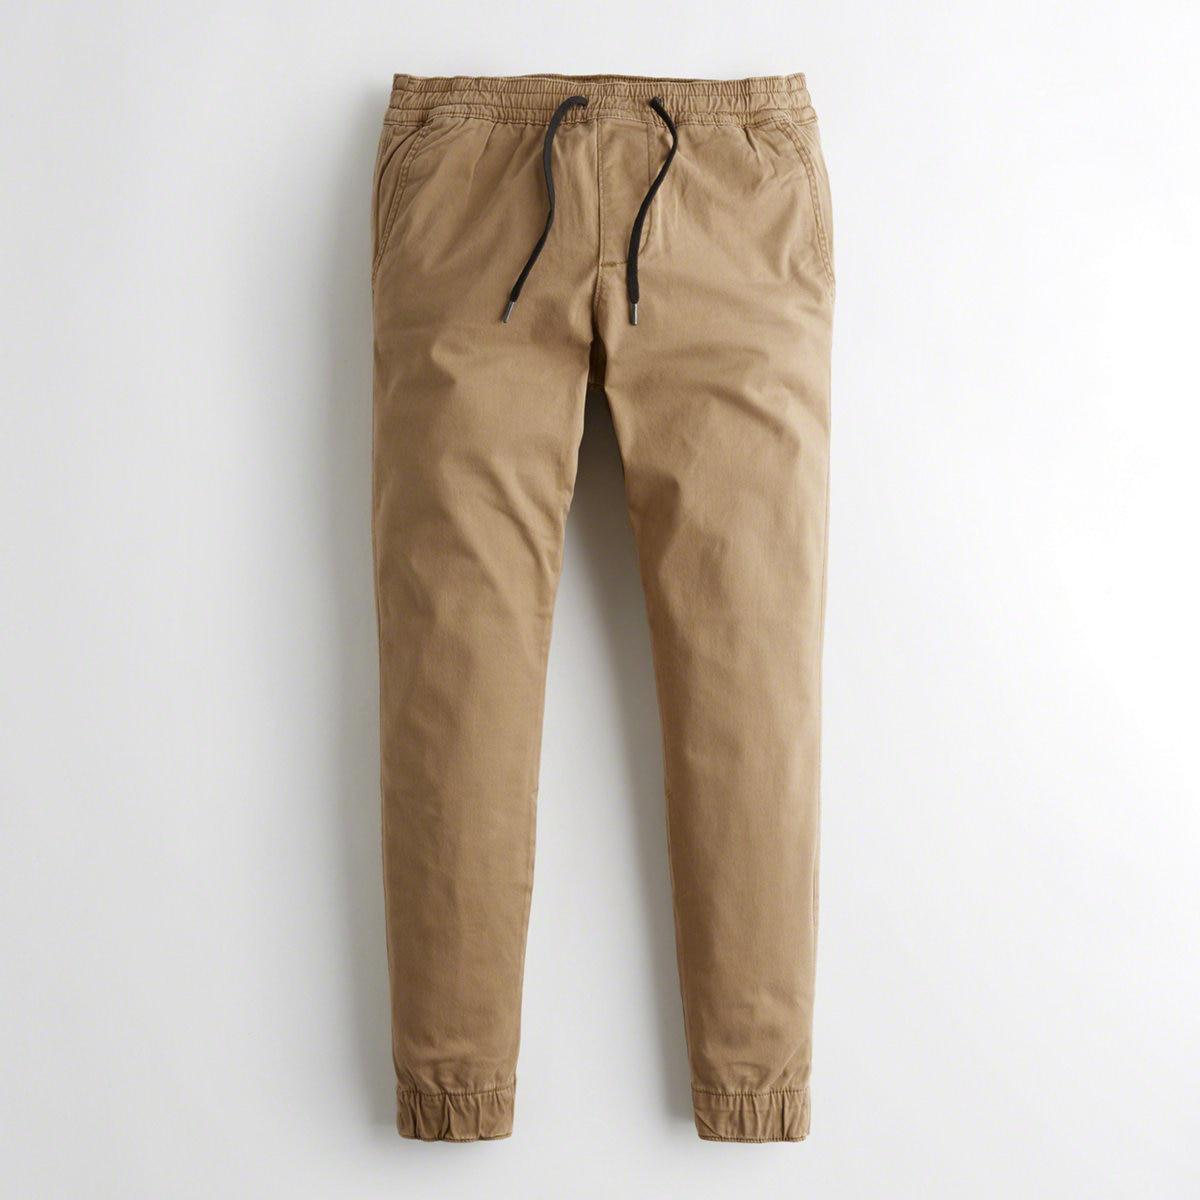 Lyst - Hollister Guys Advanced Stretch Skinny Jogger Pants From ...